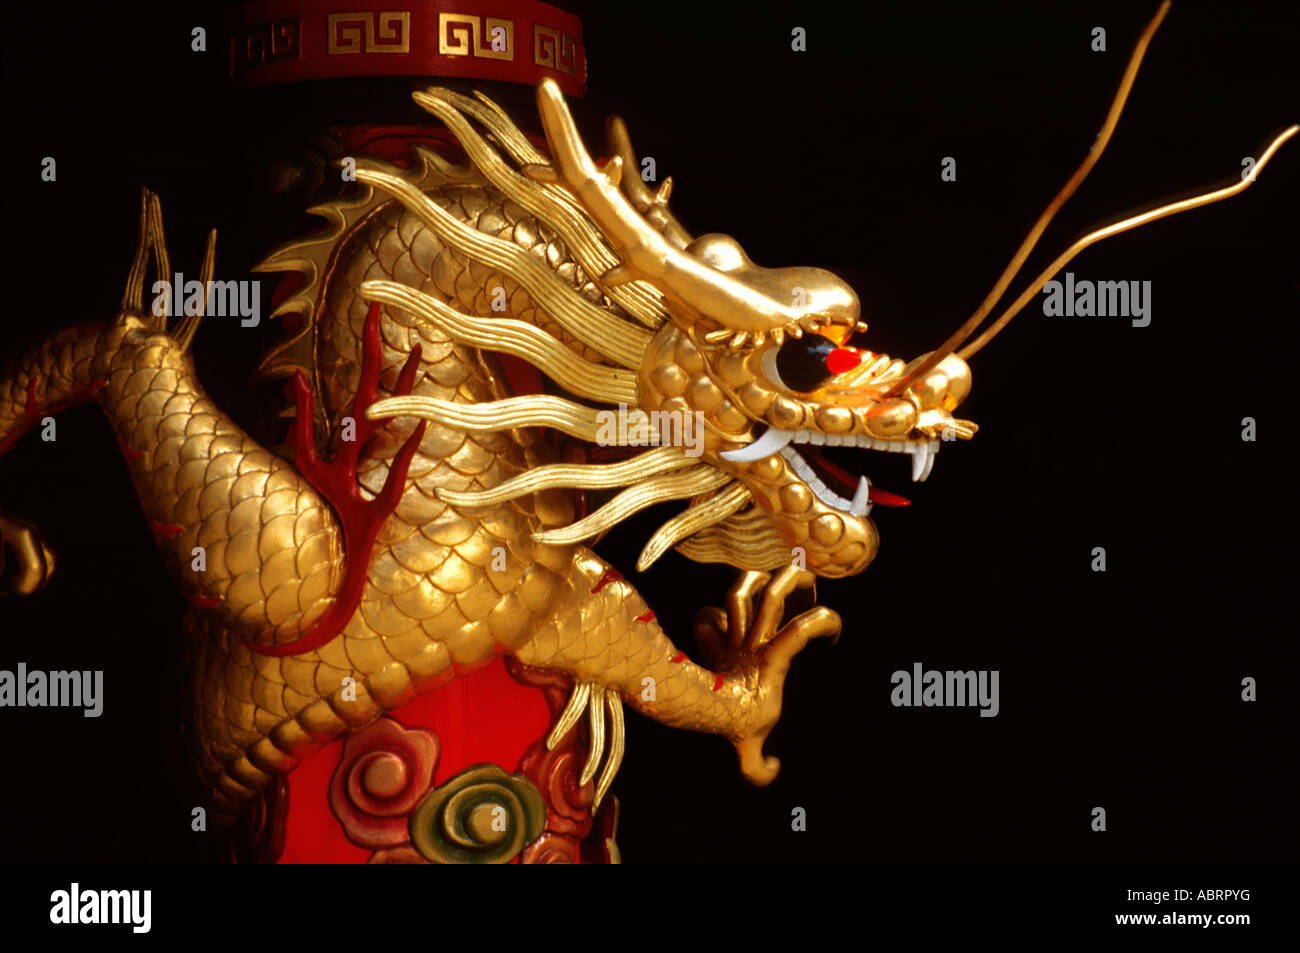 Chinese dragon sculpture outside restaurant Stock Photo